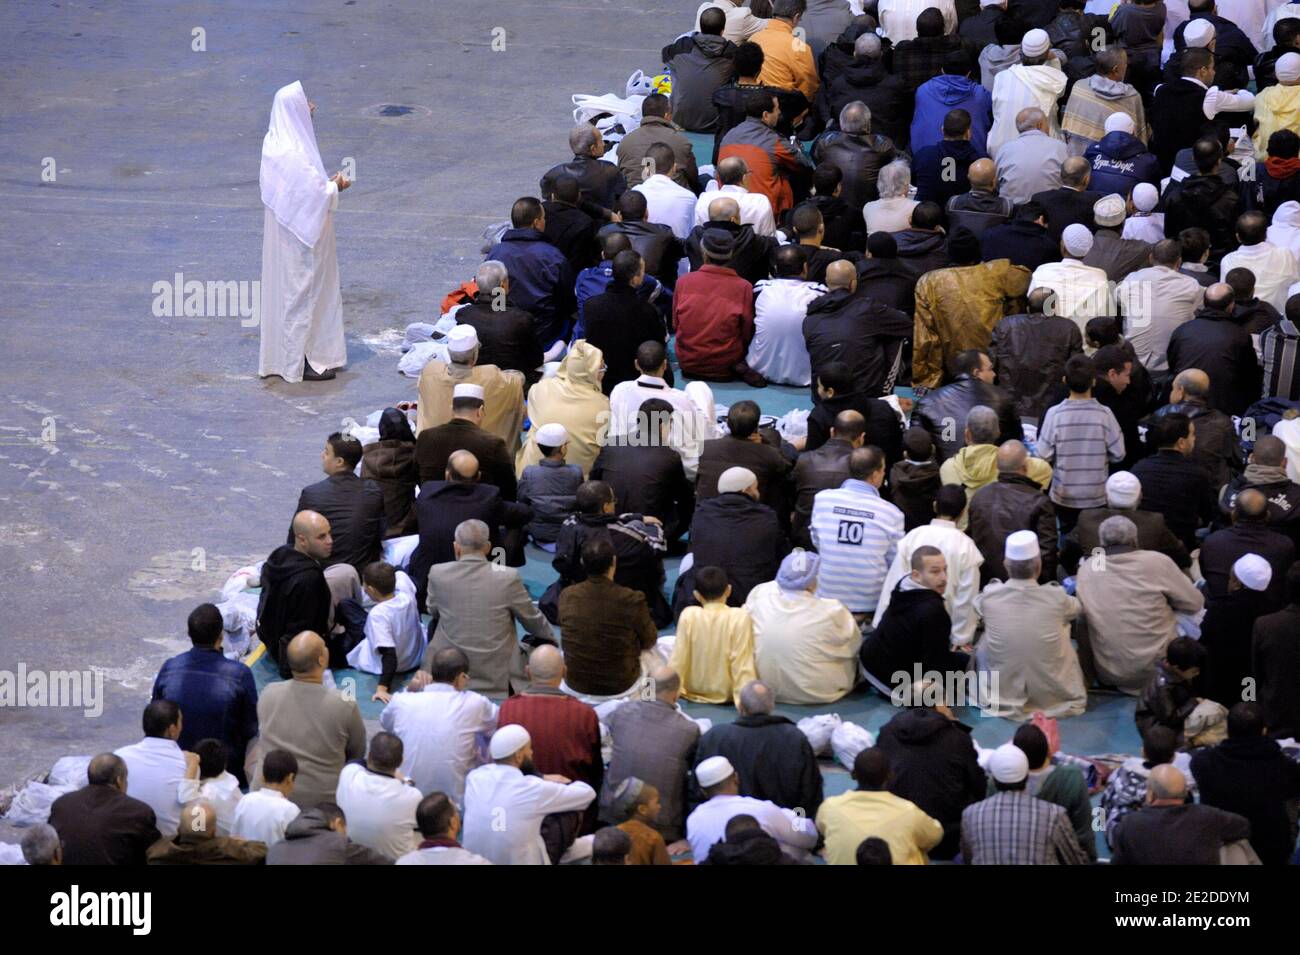 French Muslims pray at Chanot Park in Marseille, France on November 6, 2011  during the Eid-al-Adha, the feast of the Sacrifice. Photo by Franck  Pennant/ABACAPRESS.COM Stock Photo - Alamy